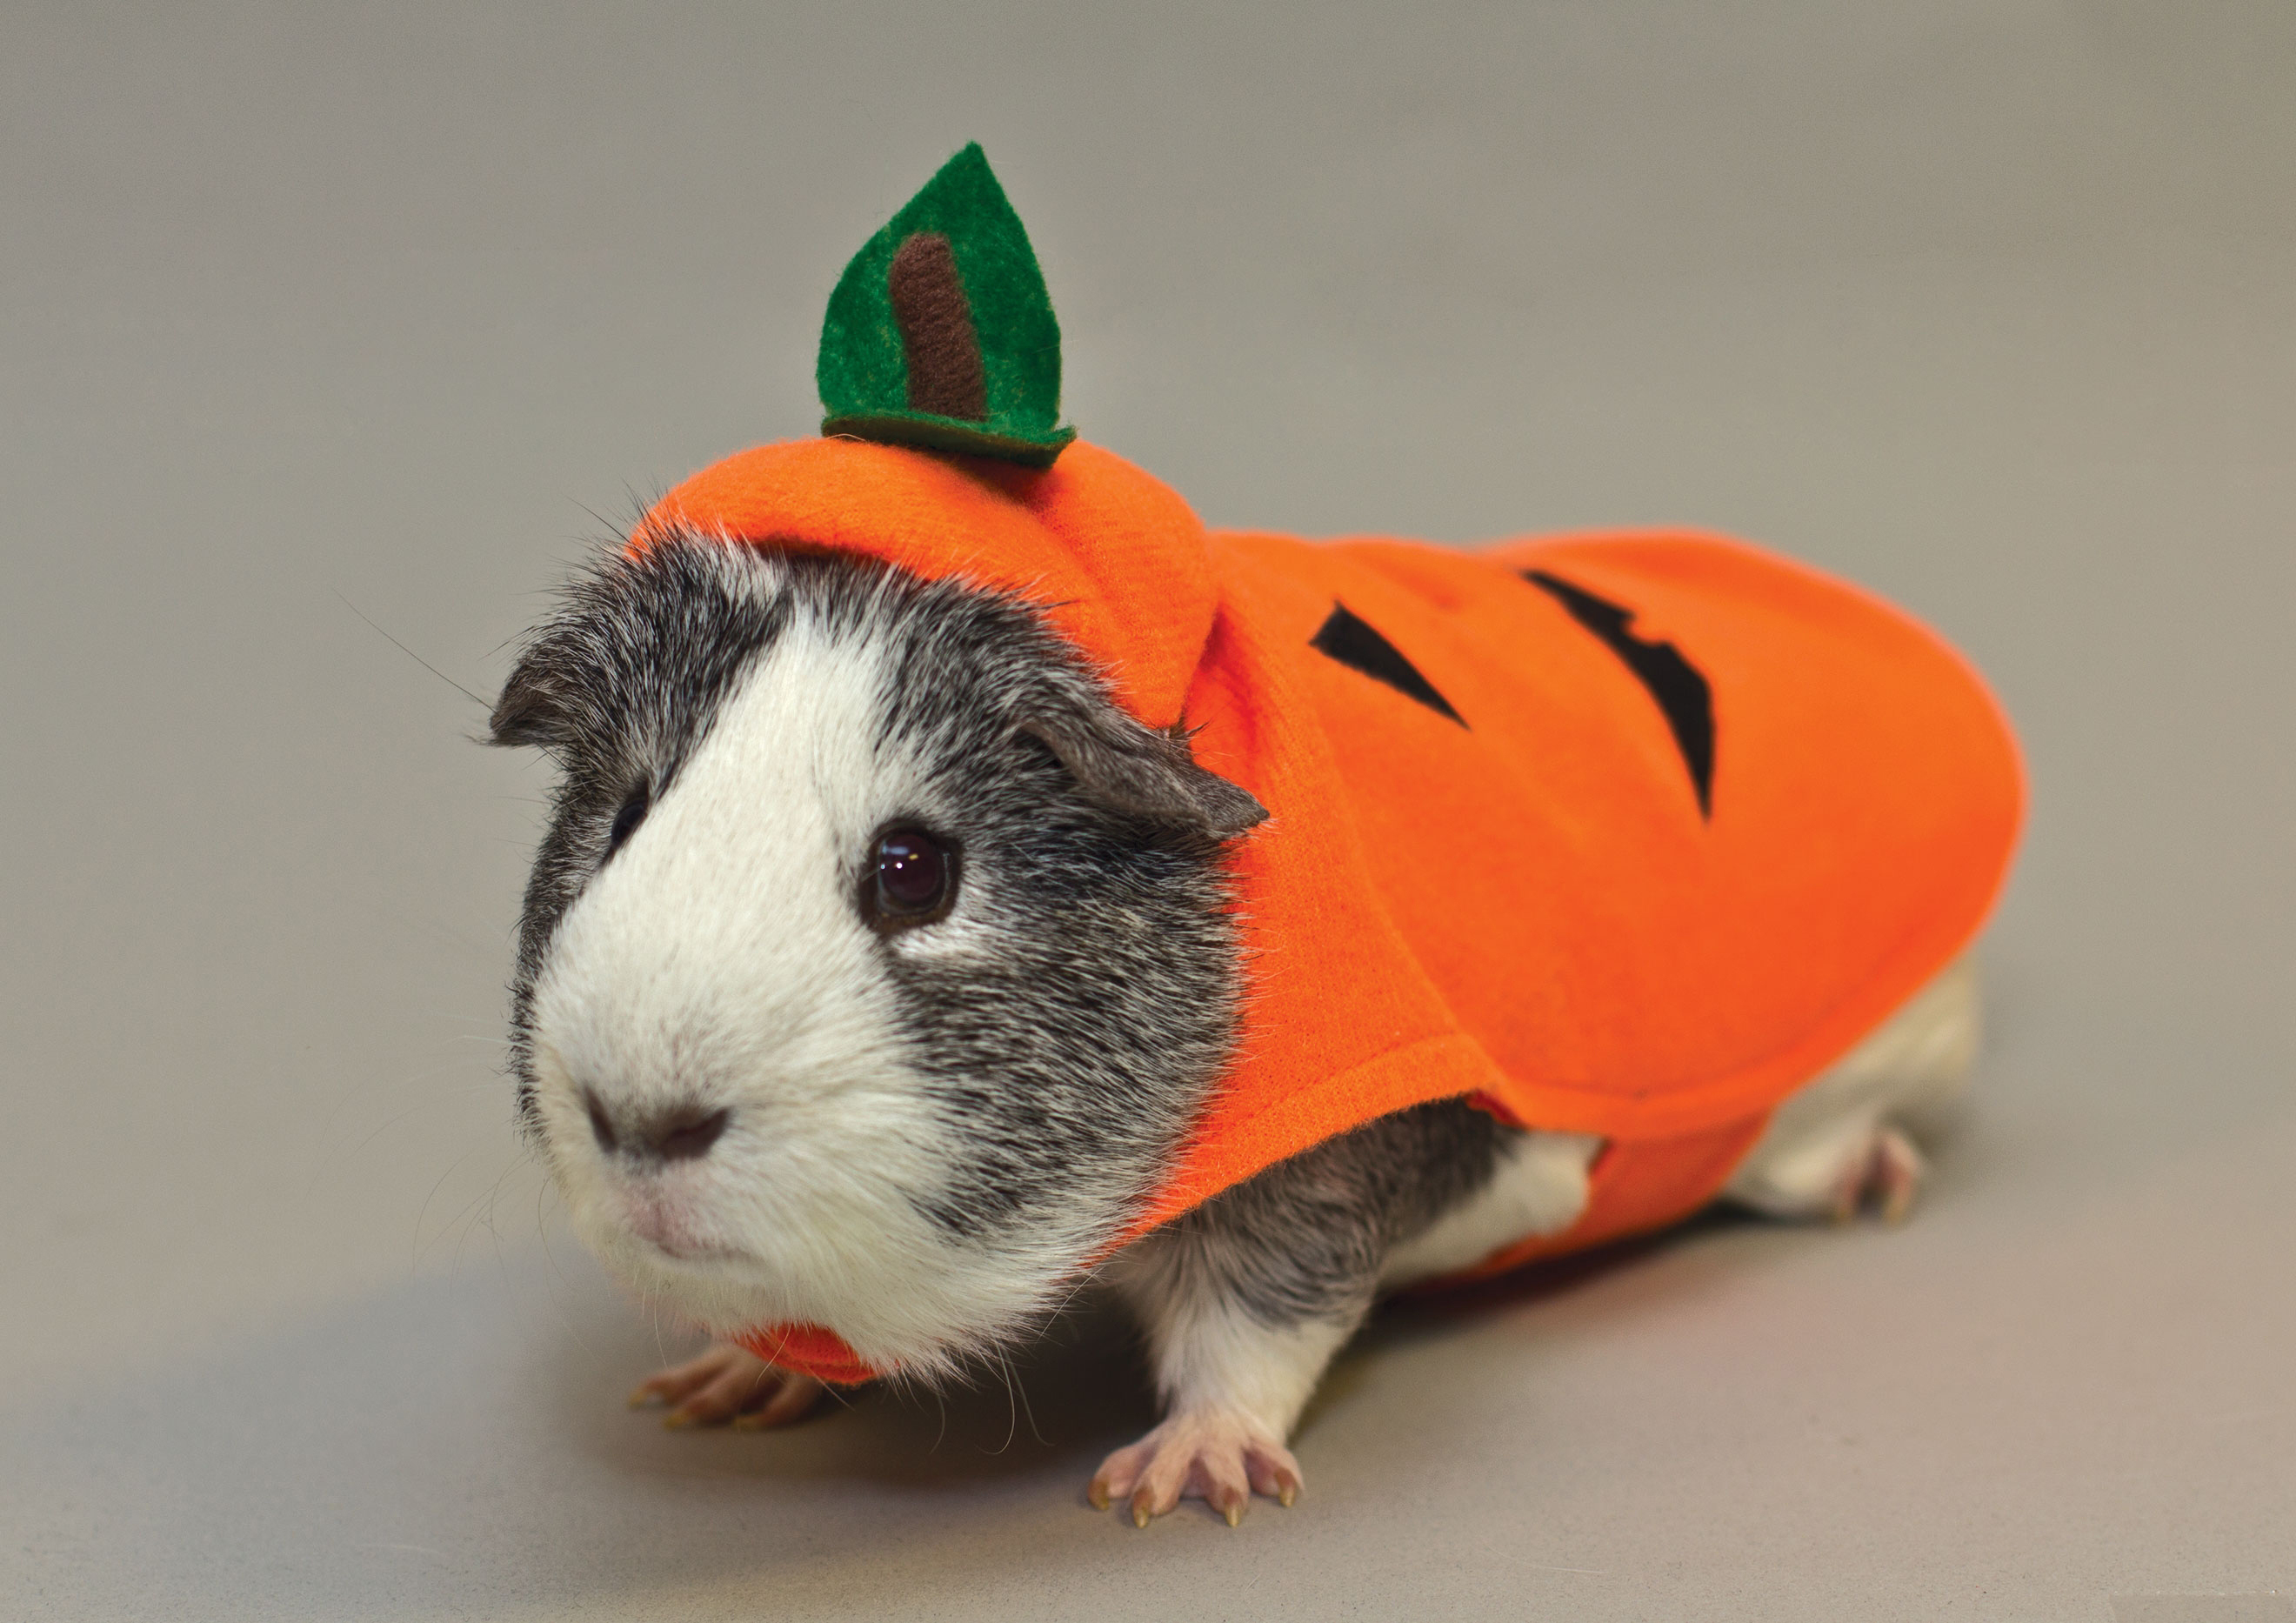 PetSmart's New 2021 Halloween Costumes For Dogs, Cats, & Guinea Pigs